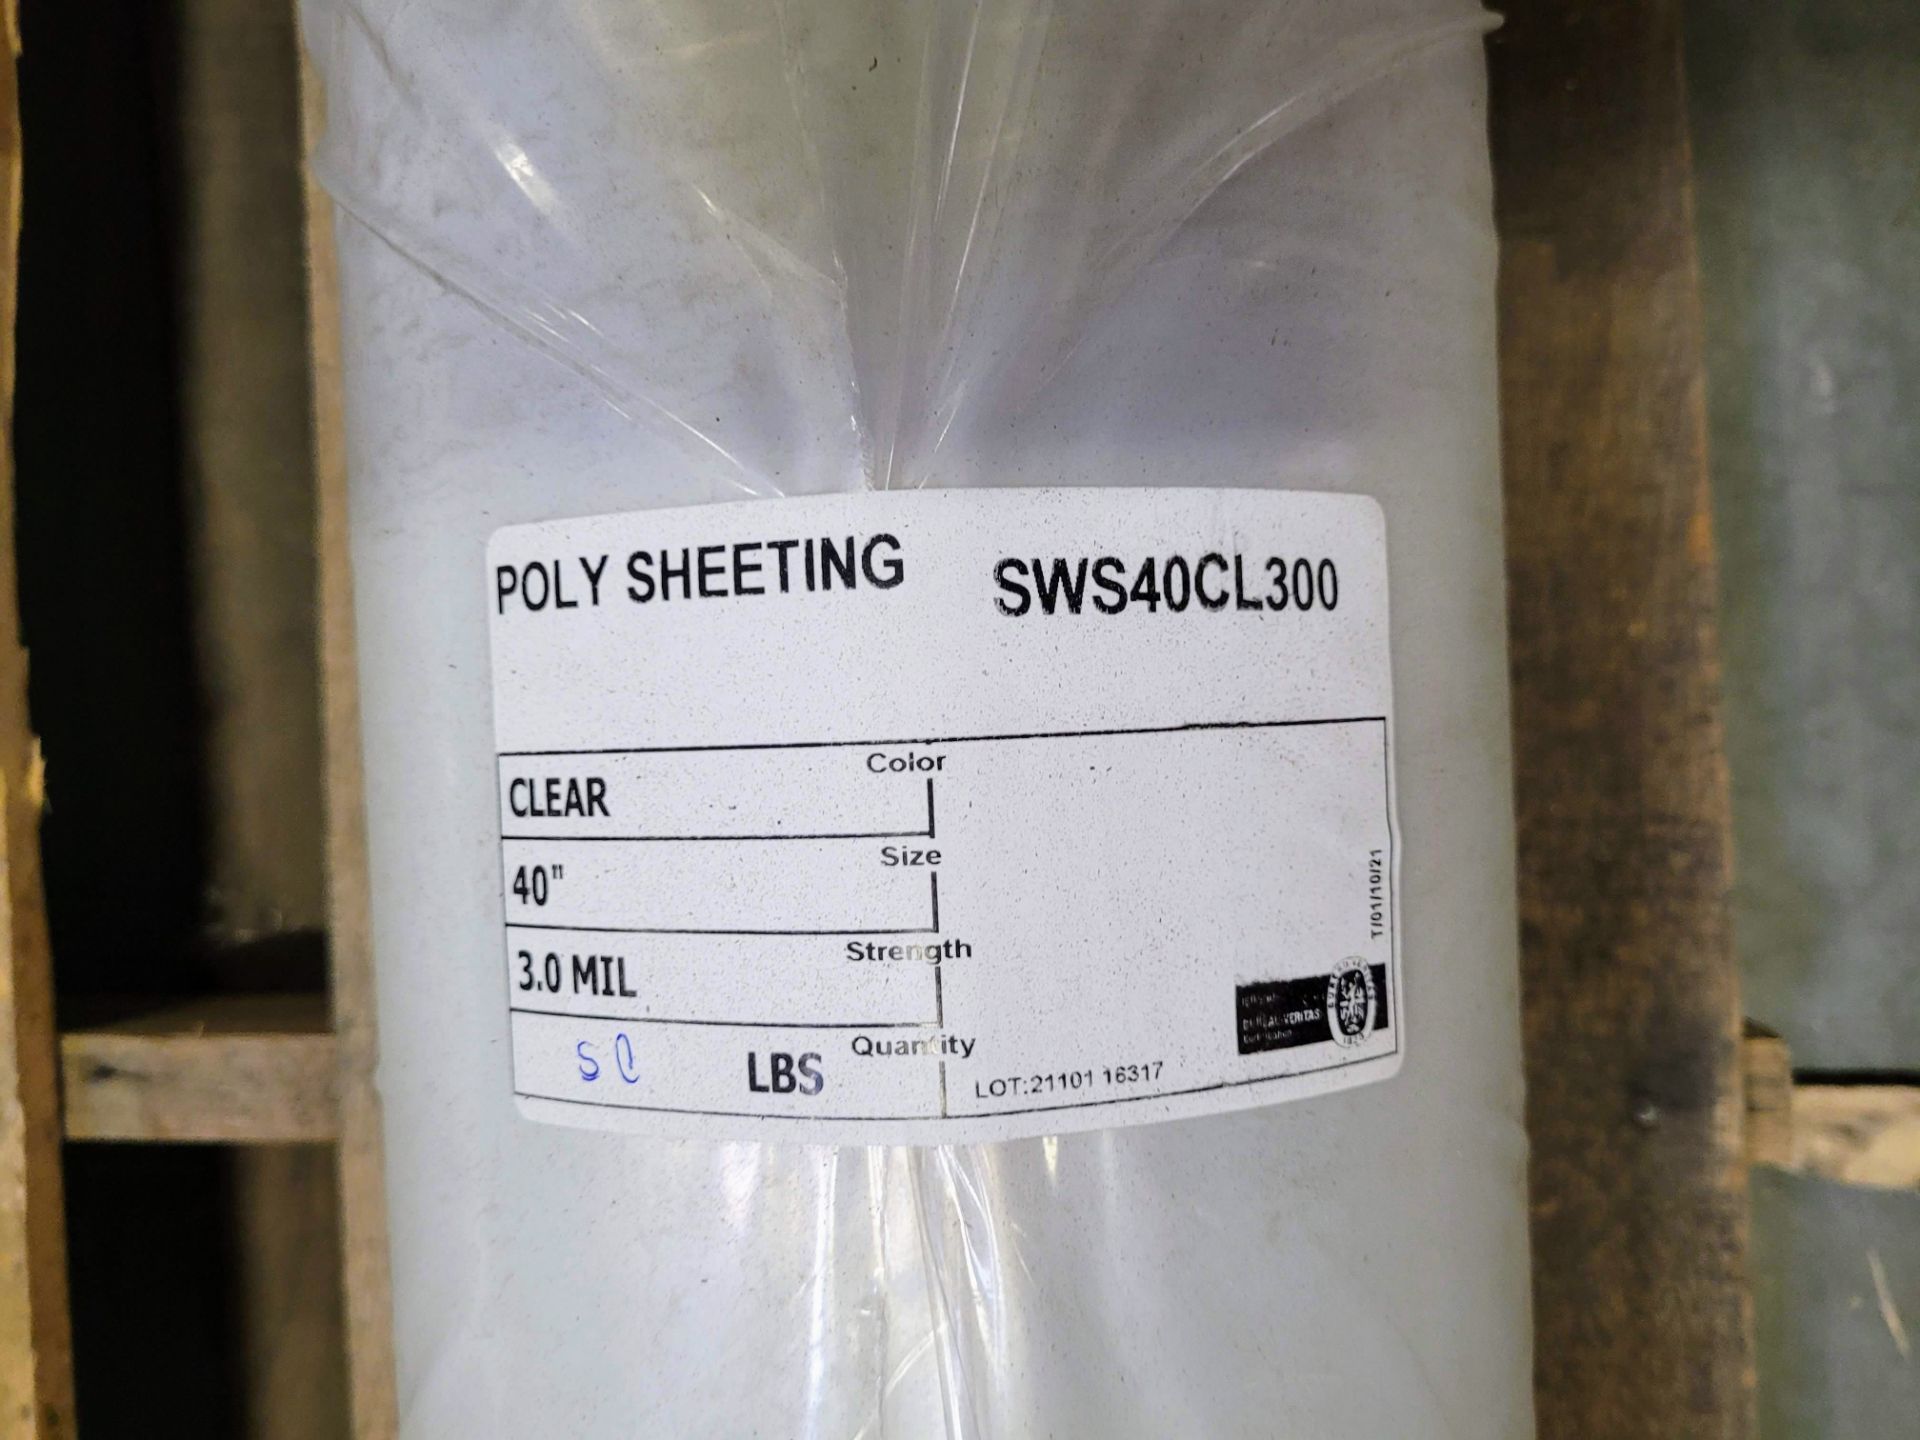 LOT - CLEAR 40" POLY SHEETING - Image 2 of 2